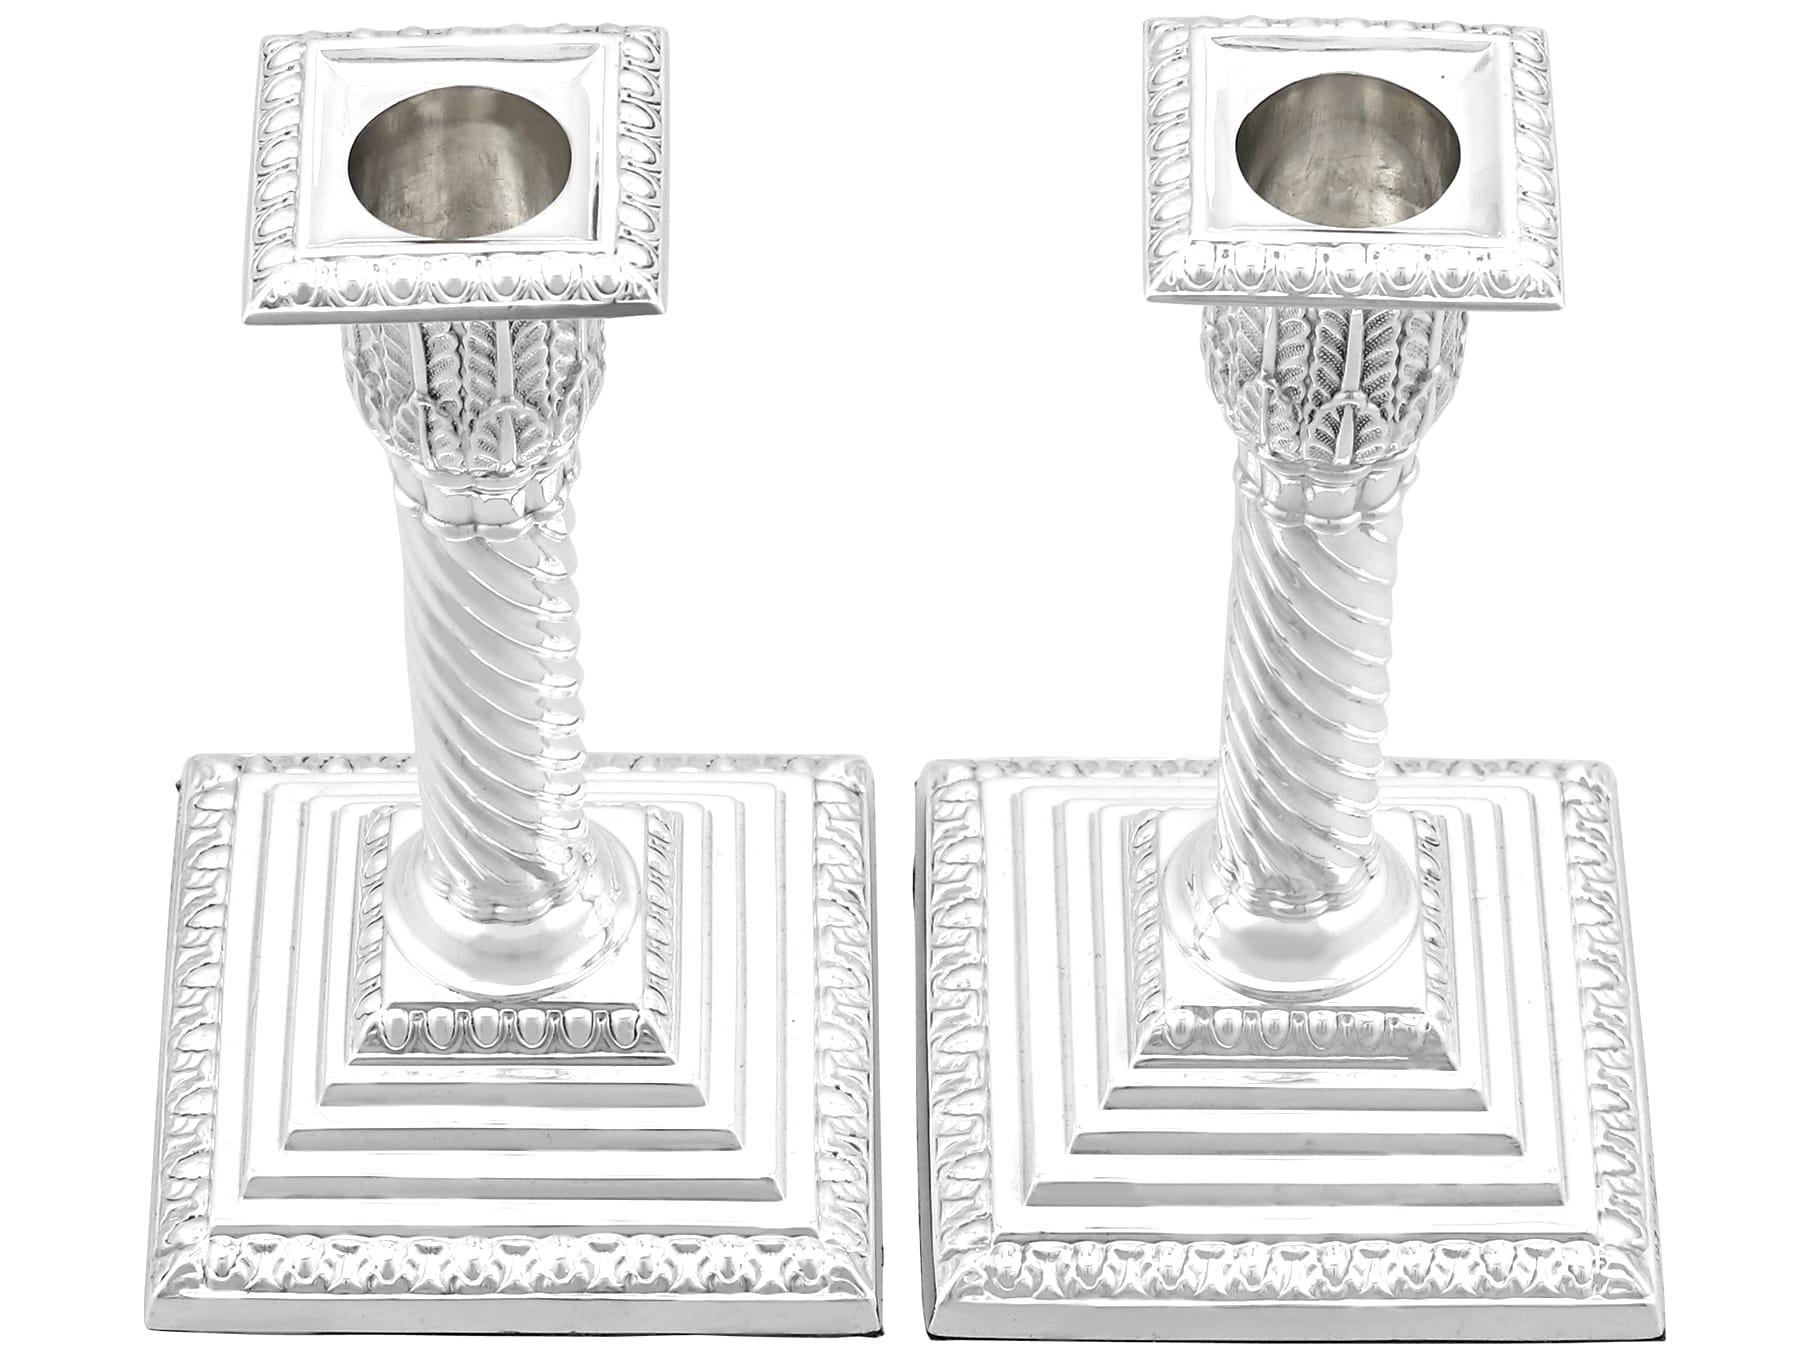 An exceptional, fine and impressive pair of antique Victorian English sterling silver piano candlesticks/candle holders; an addition of our ornamental silverware collection.

These exceptional antique Victorian sterling silver candlesticks have a